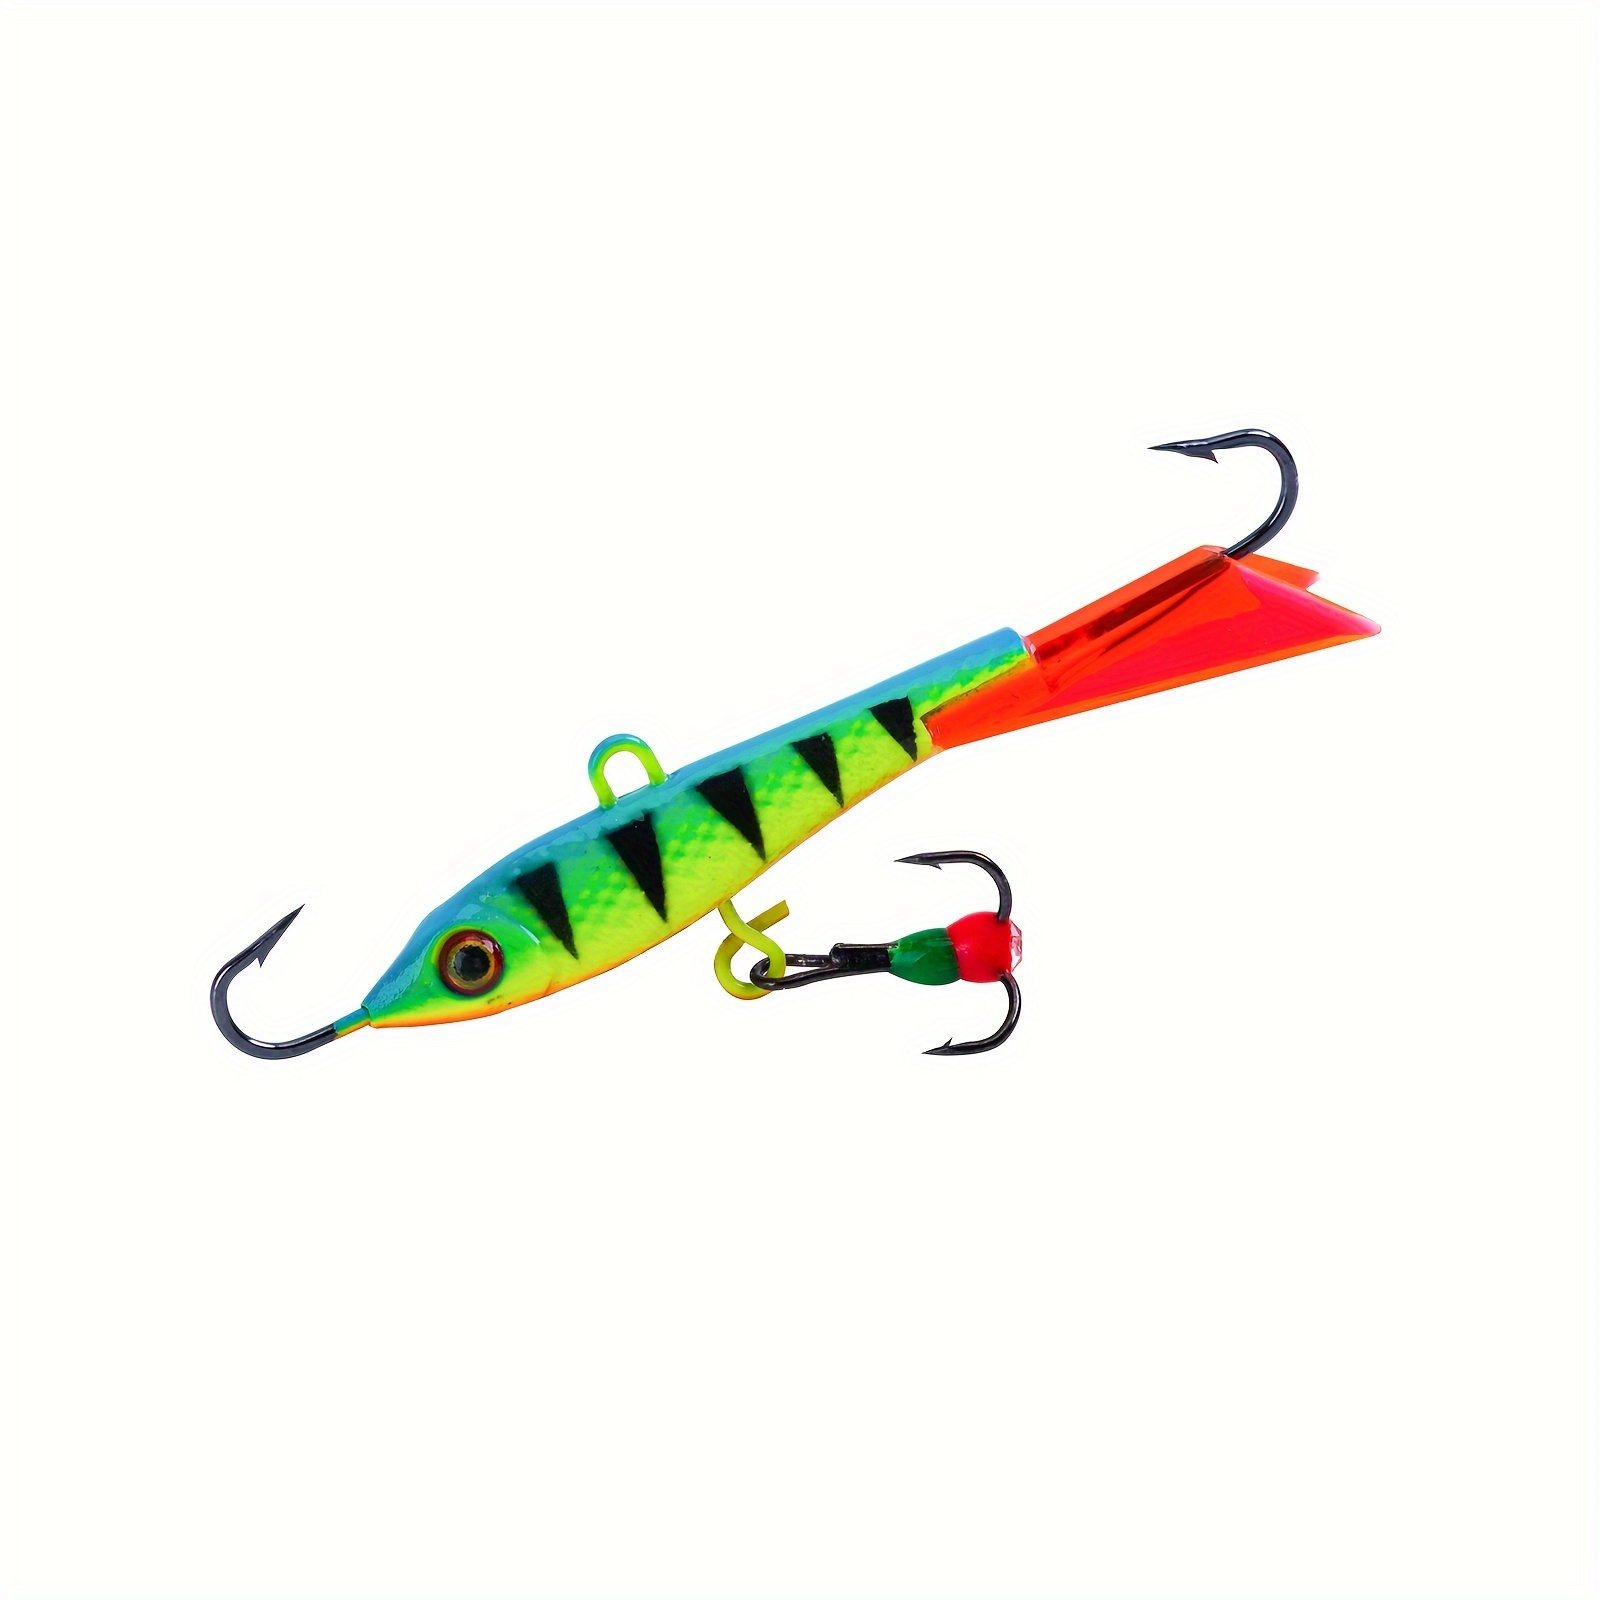 Ice rods - Ice Lures / Vertical lures 